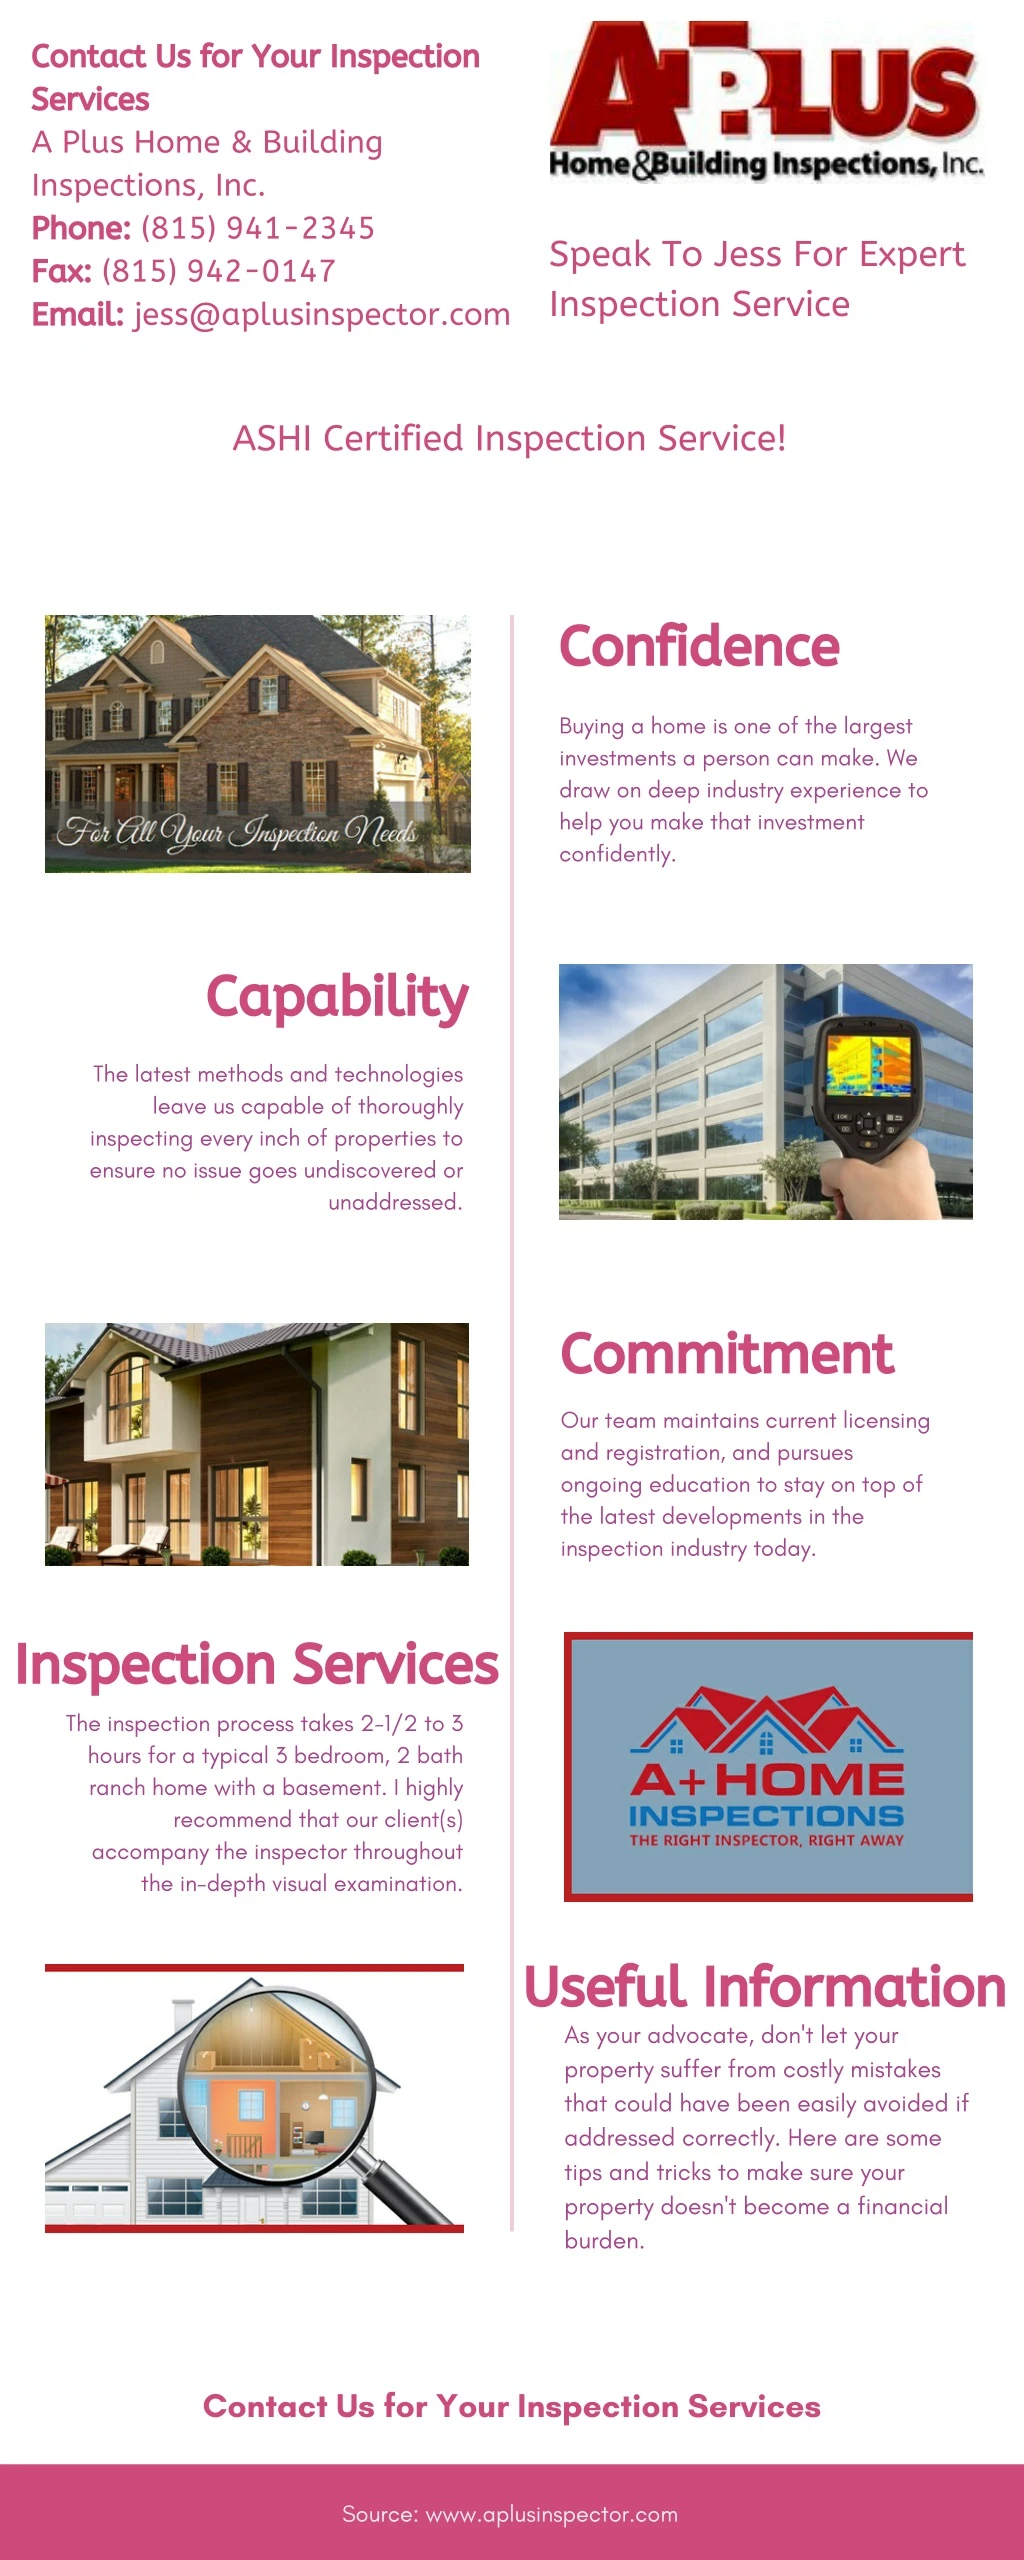 contact us for your inspection services a plus